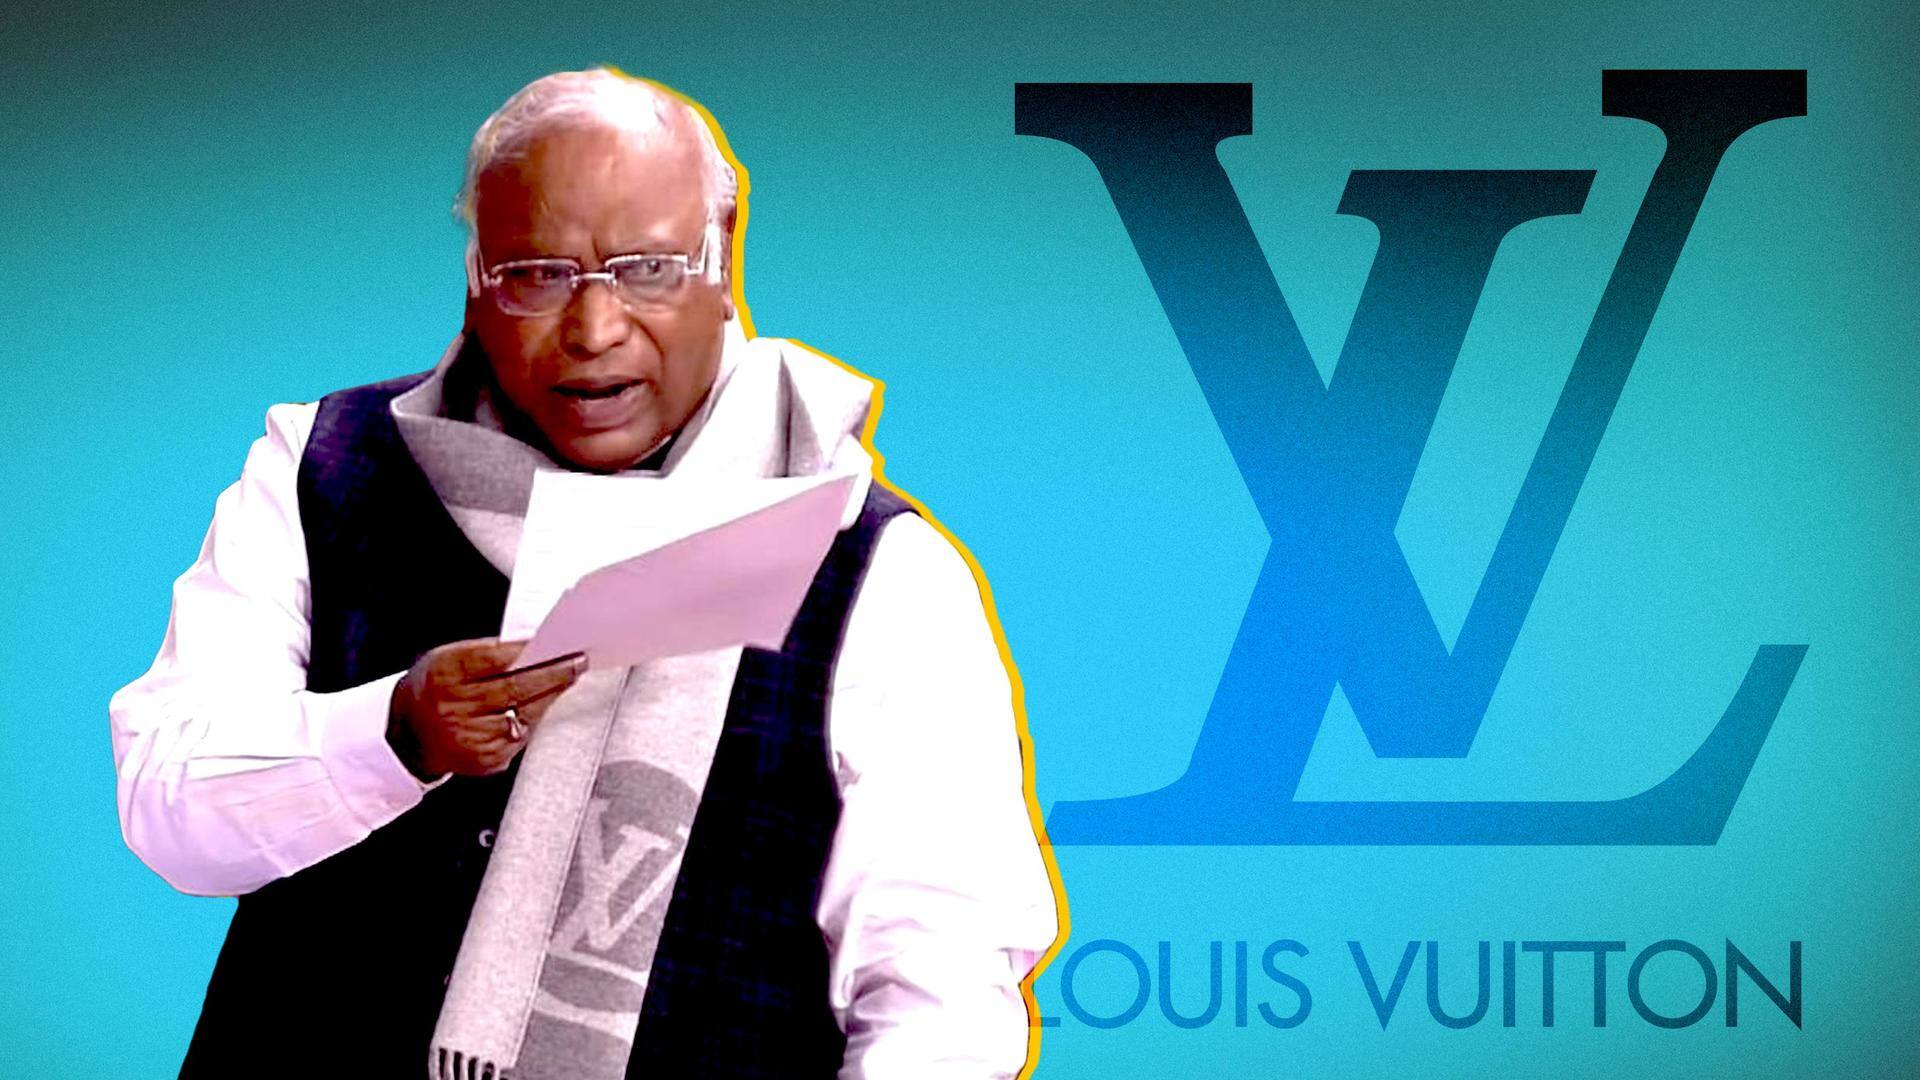 Louis Vuitton trends as Congress President wears it in Parliament<strong data-stringify-type="bold" style="box-sizing: inherit; color: rgb(29, 28, 29); font-family: Slack-Lato, Slack-Fractions, appleLogo, sans-serif; font-size: 15px; font-variant-ligatures: common-ligatures; letter-spacing: normal; background-color: rgb(248, 248, 248);" data-mce-style="box-sizing: inherit; color: rgb(29, 28, 29); font-family: Slack-Lato, Slack-Fractions, appleLogo, sans-serif; font-size: 15px; font-variant-ligatures: common-ligatures; letter-spacing: normal; background-color: rgb(248, 248, 248);"></strong>